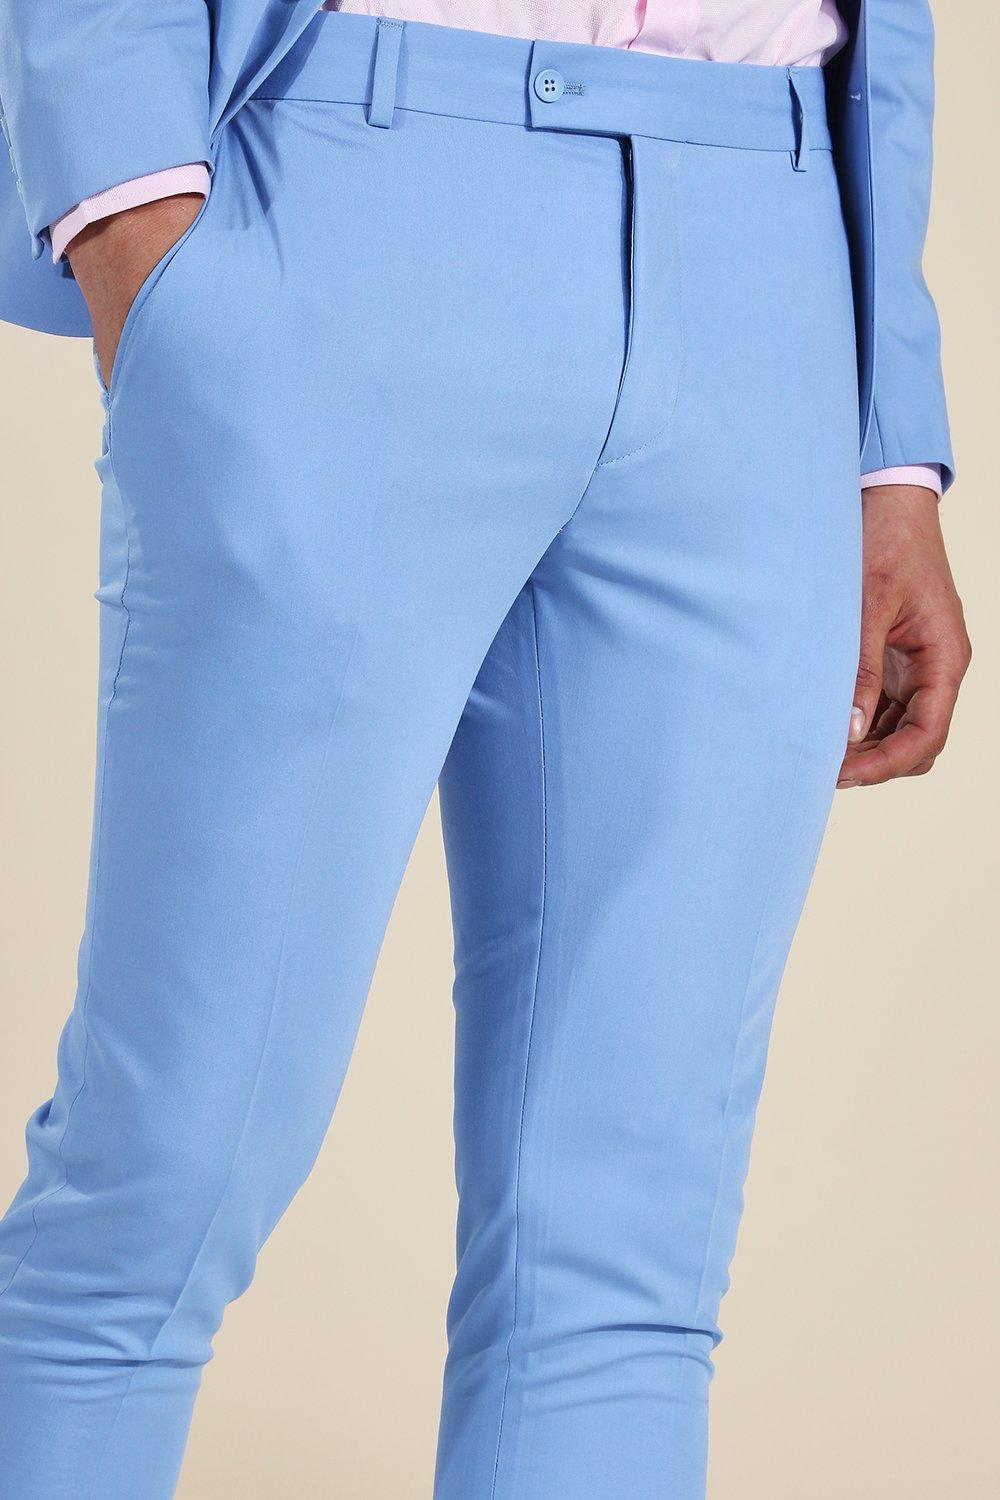 white luxury Slim Fit Men Light Blue Trousers - Buy white luxury Slim Fit  Men Light Blue Trousers Online at Best Prices in India